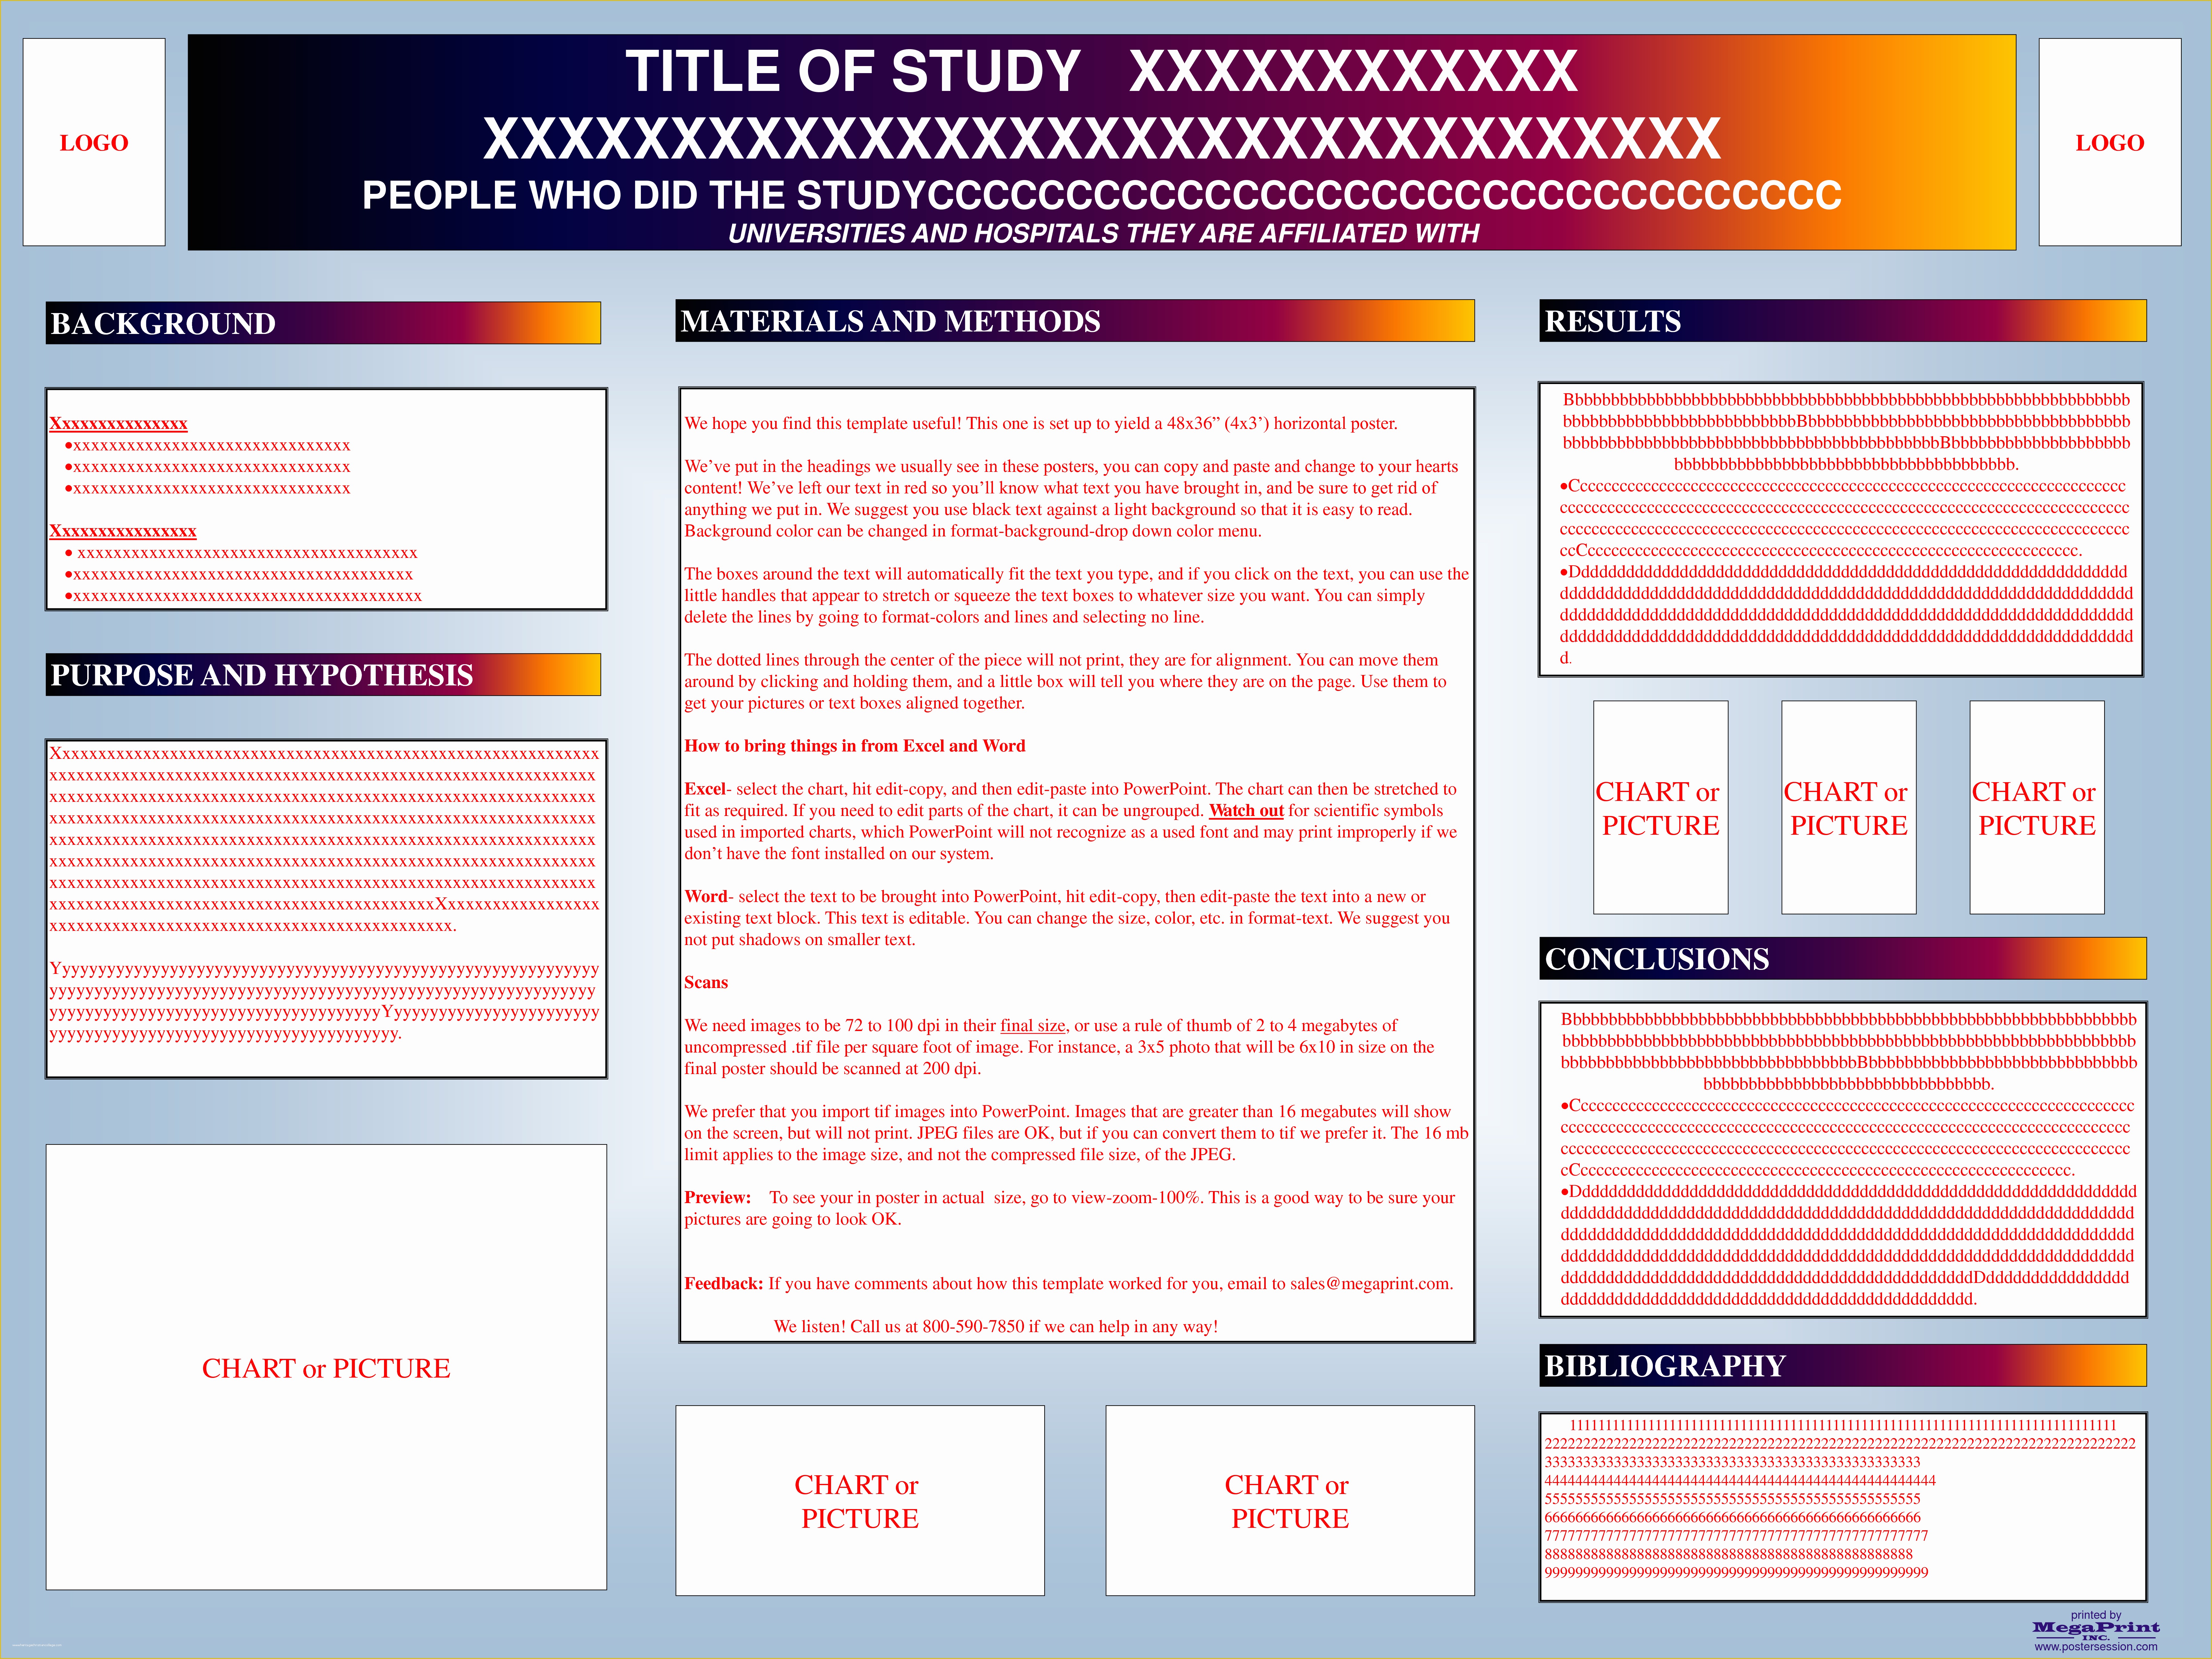 Free Powerpoint Poster Templates Of Dissertation Poster Presentations